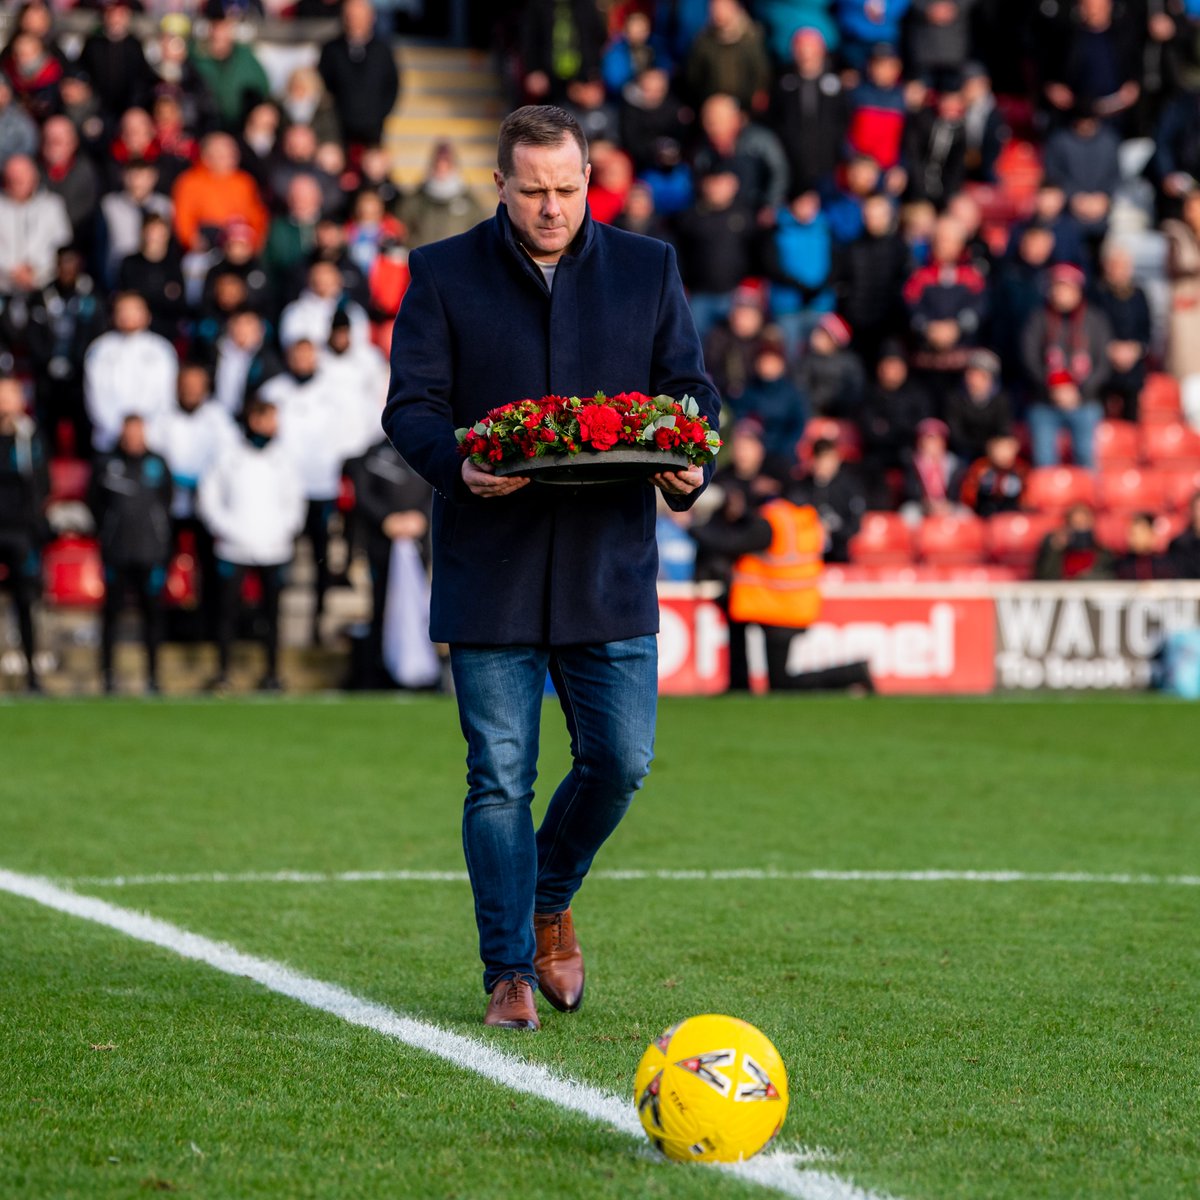 With it being #ThrowbackThursday, we thought we would share a picture from January when John Byrne laid a wreath on @ftfc's pitch as part of their annual memorial fixture 🌹 ☎️ 01253 863022 | 💻 jtbyrne.co.uk